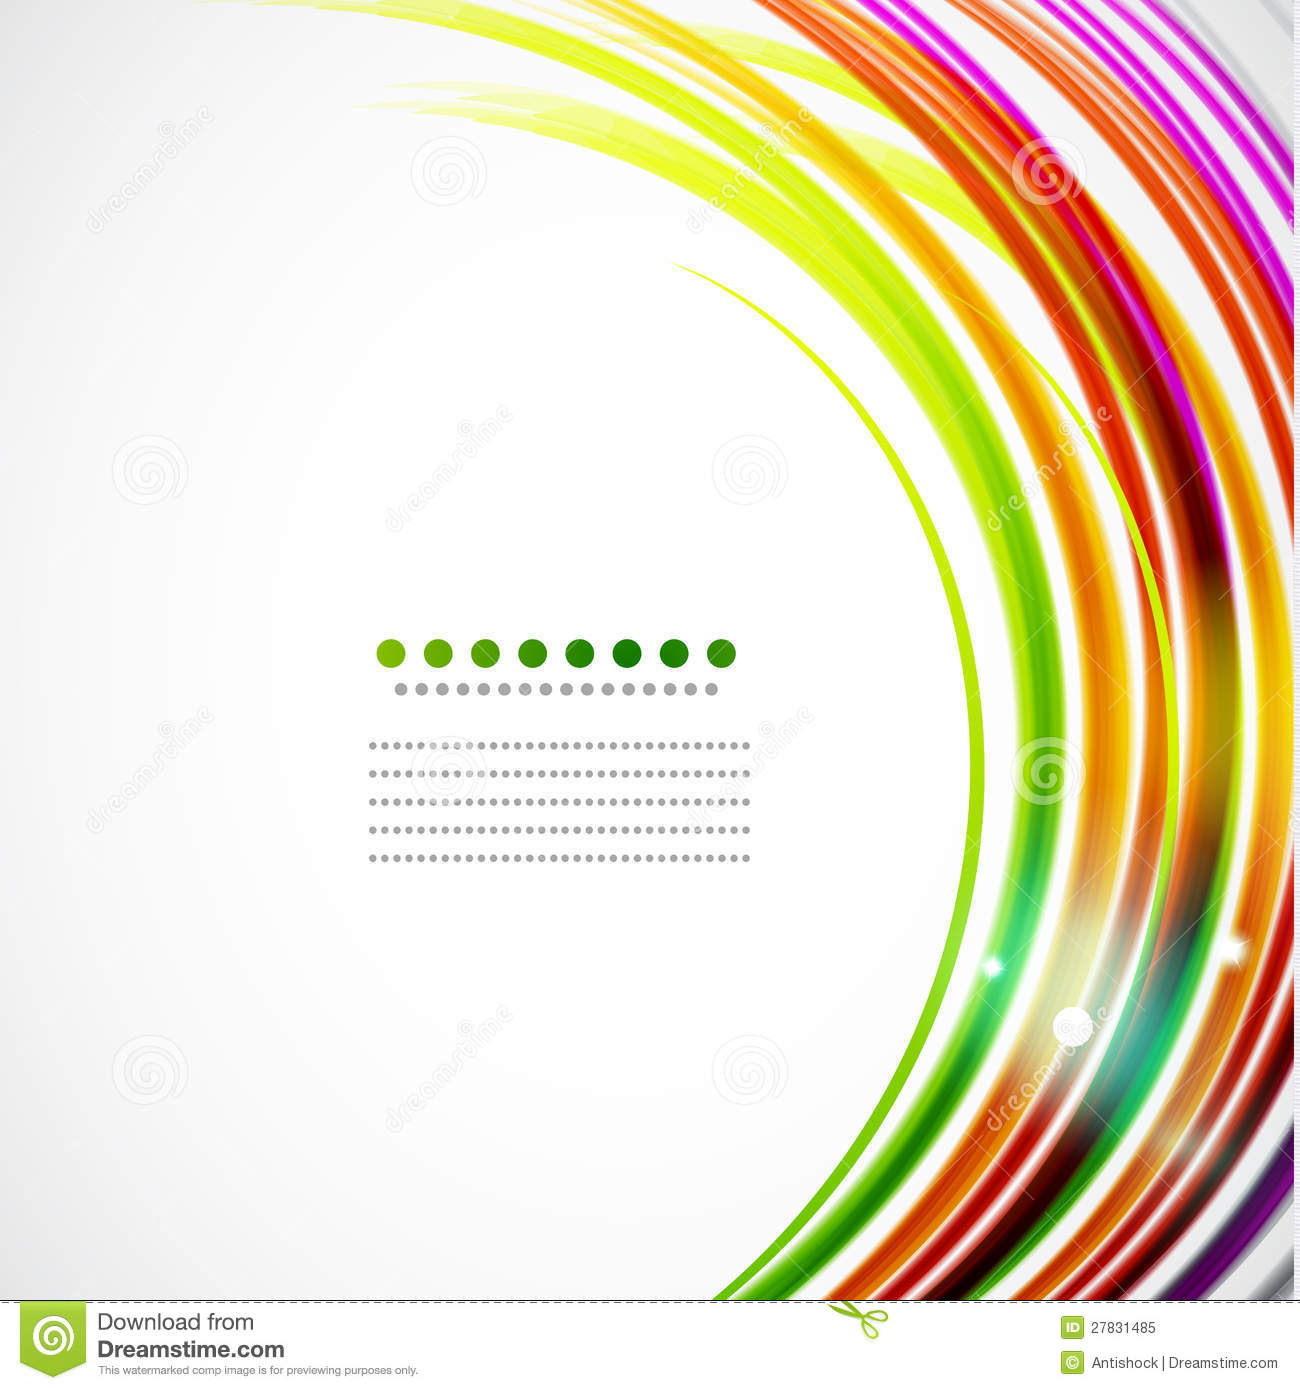 Colorful Wavy Lines Royalty Free Stock Photo   Image  27831485